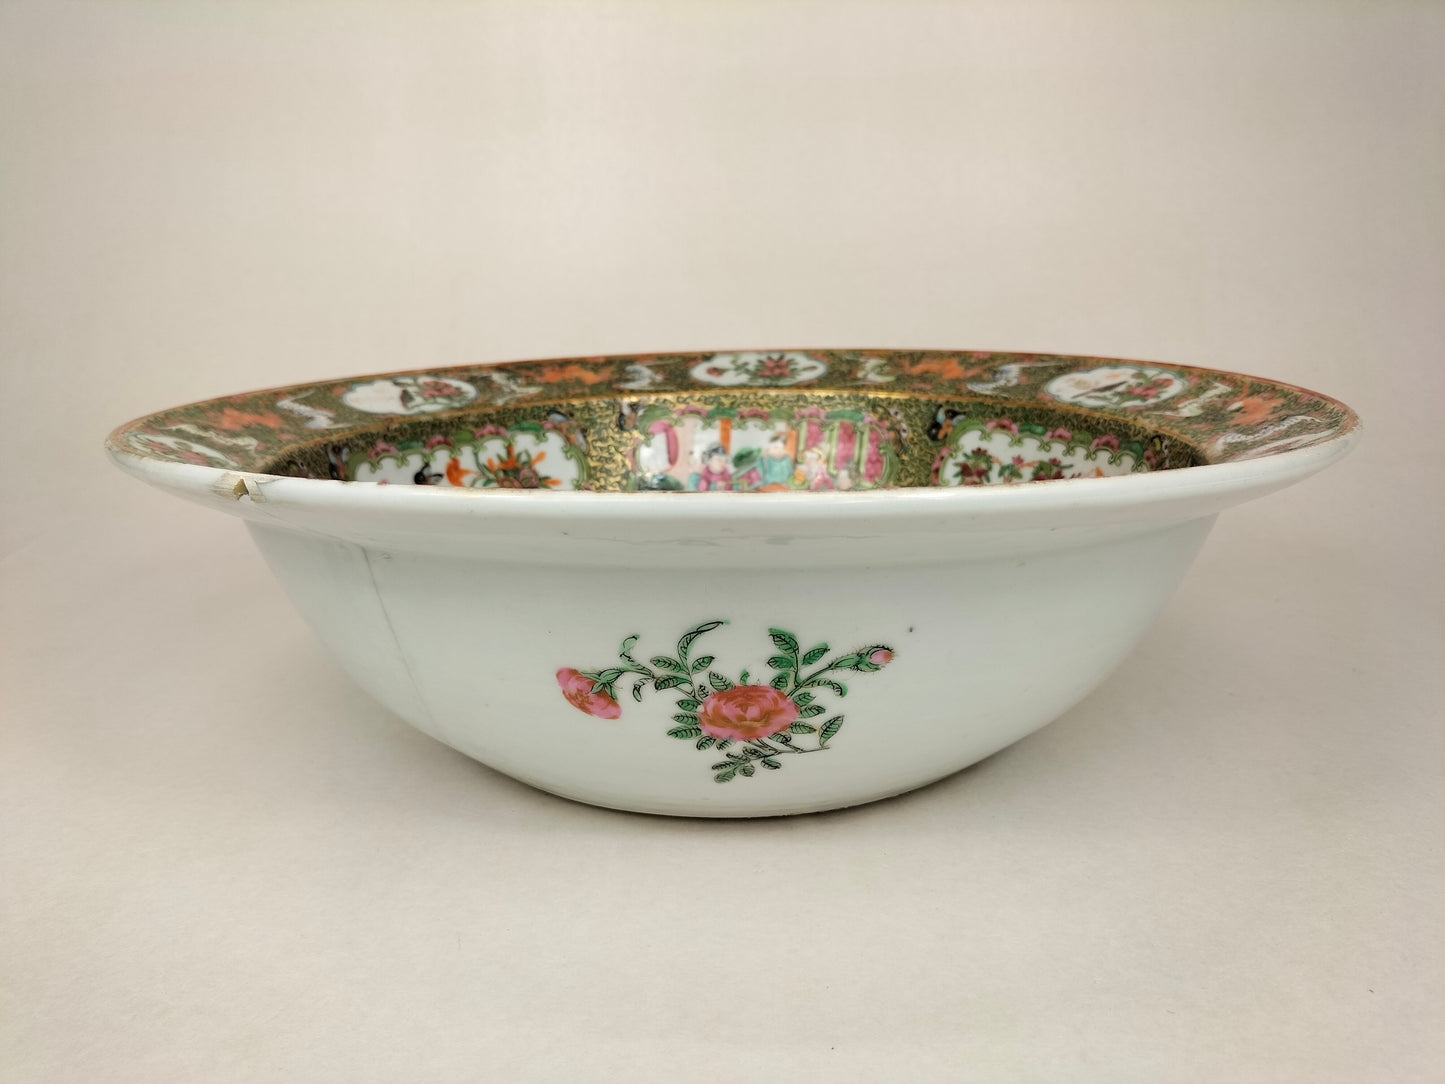 Large XL antique Chinese canton rose medallion bowl // Qing Dynasty - 19th century